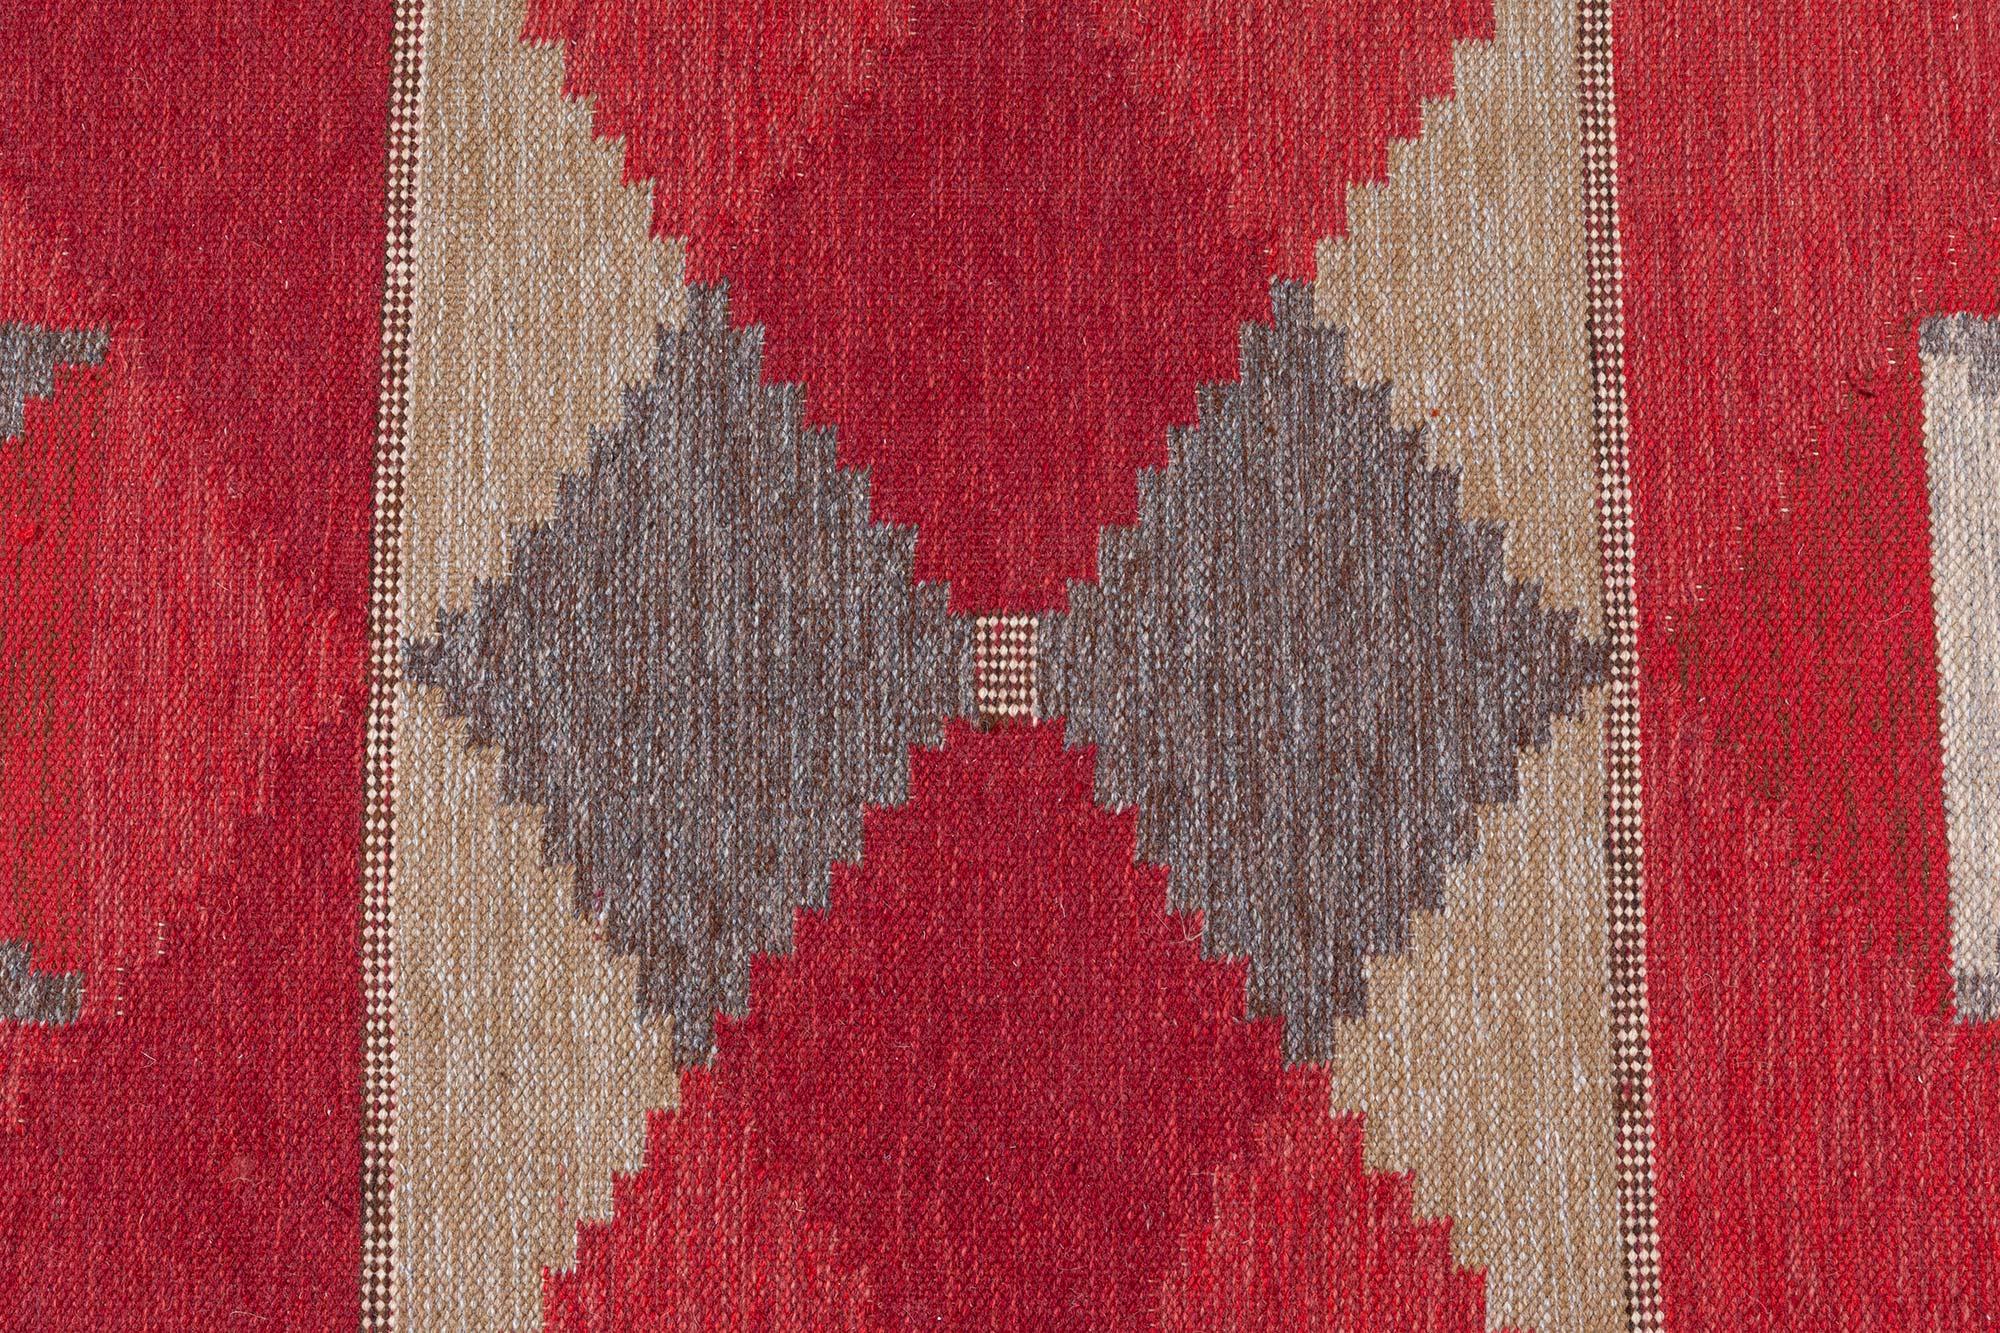 Hand-Woven Vintage Swedish Flat Woven Rug by Rakel Carlander For Sale